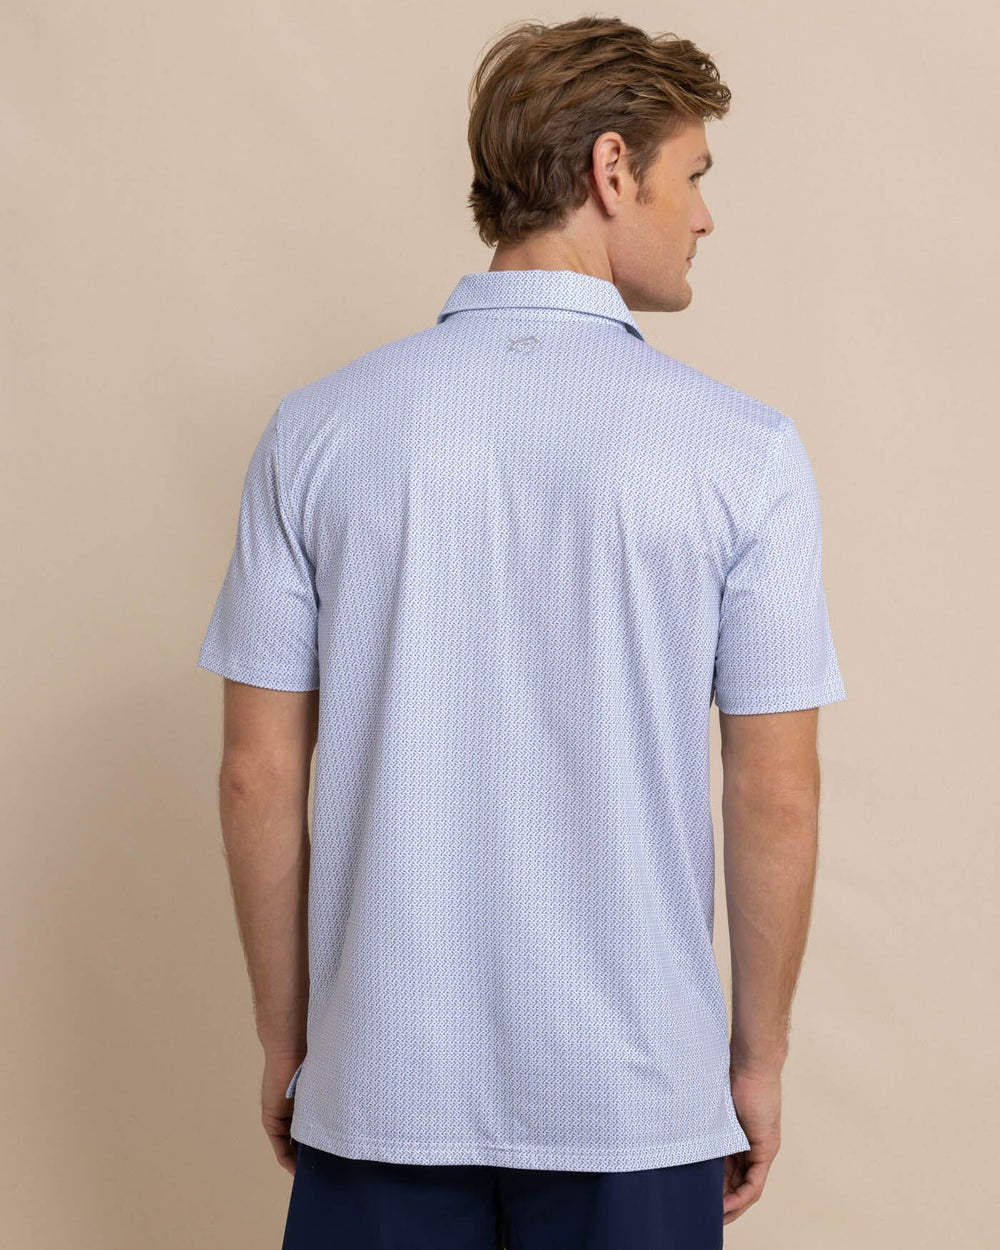 The back view of the Southern Tide Driver Clubbin It Printed Polo by Southern Tide - Classic White